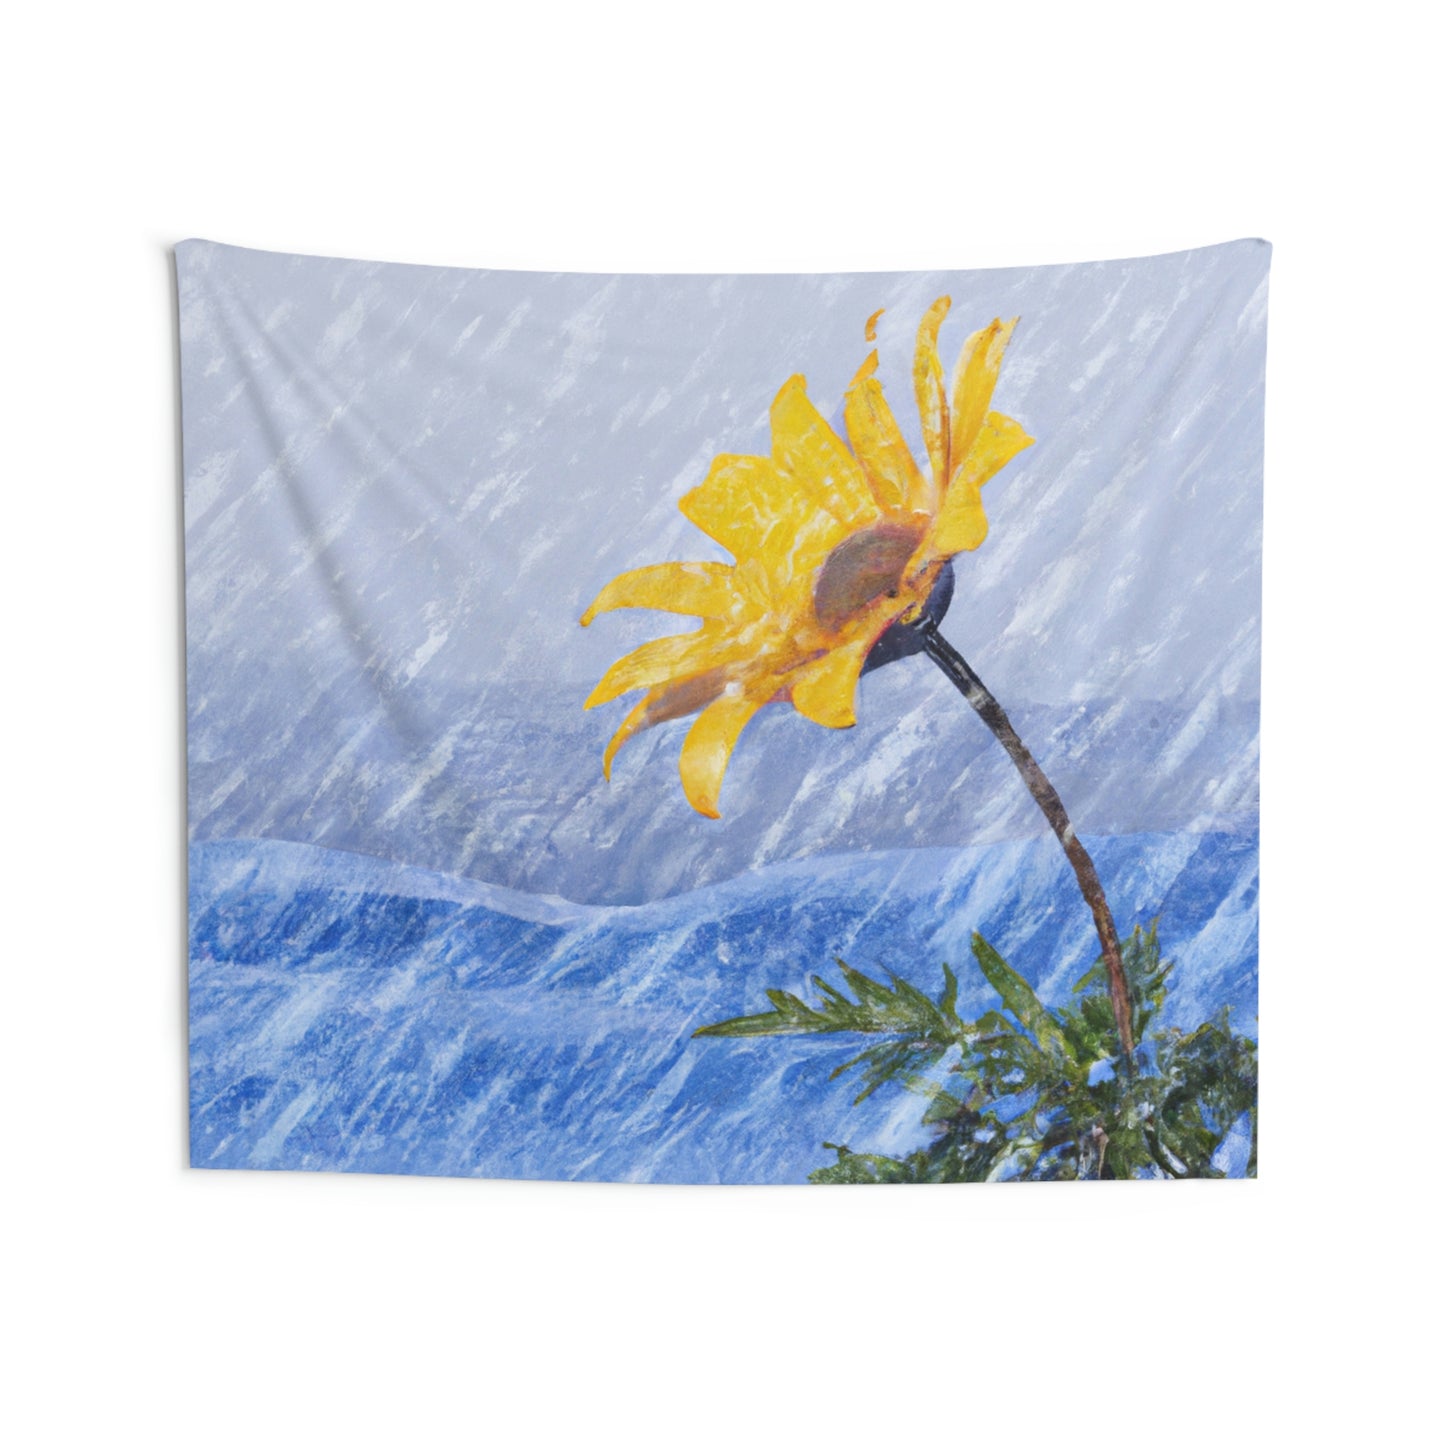 "A Burst of Color in the Glistening White: The Miracle of a Flower Blooms in a Snowstorm" - The Alien Wall Tapestries